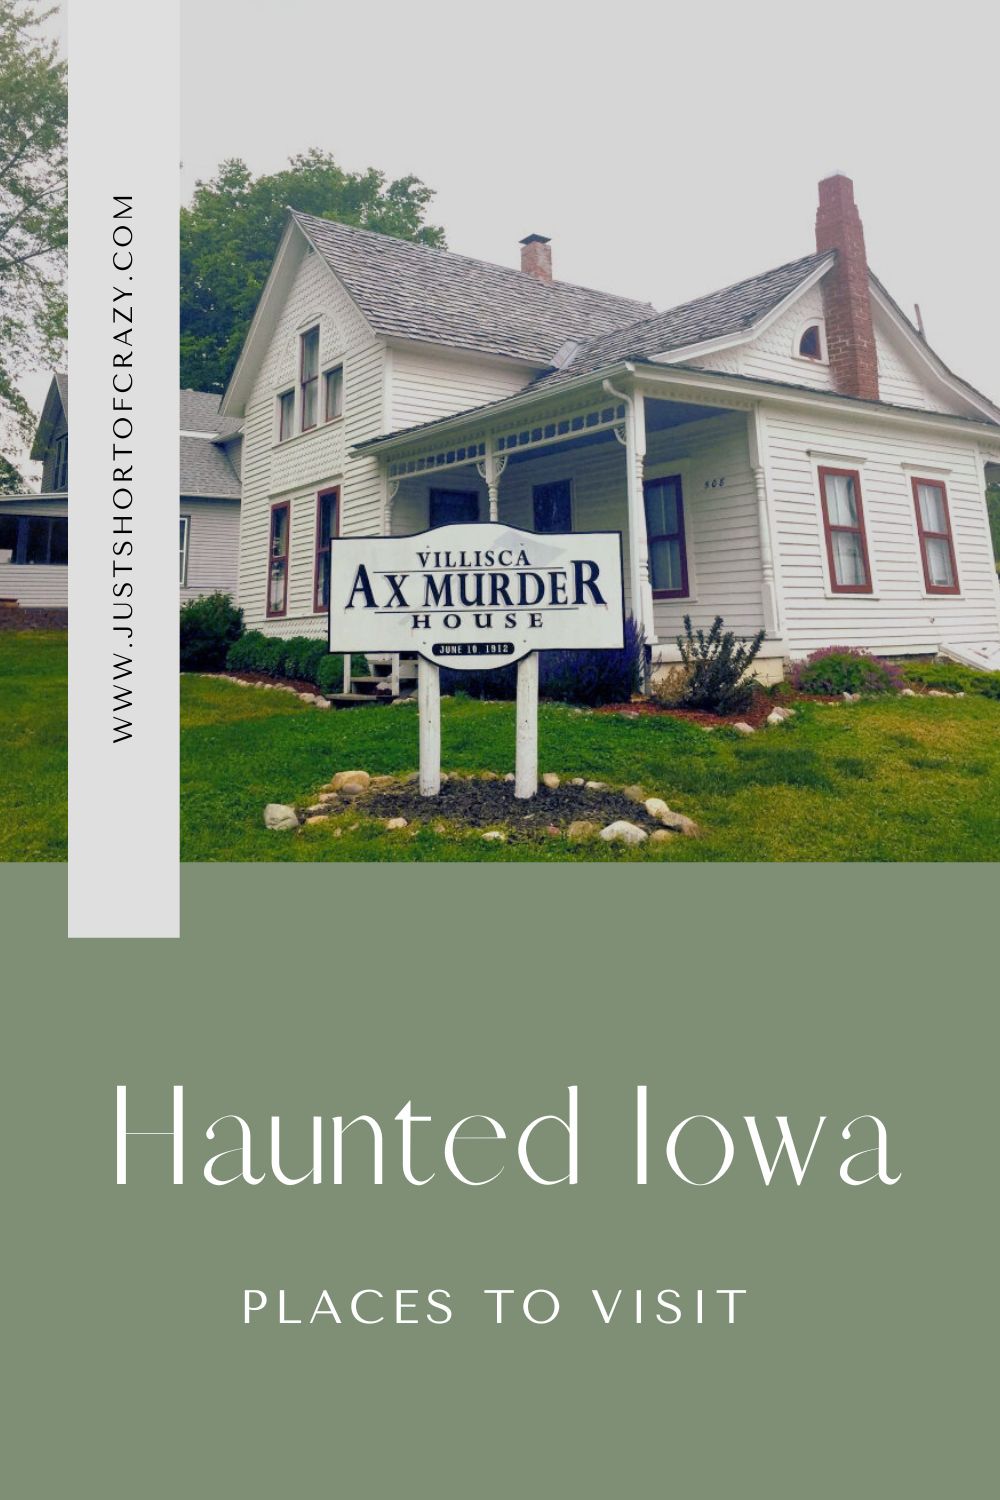 Haunted Iowa pin image with Villisca Ax Murder house